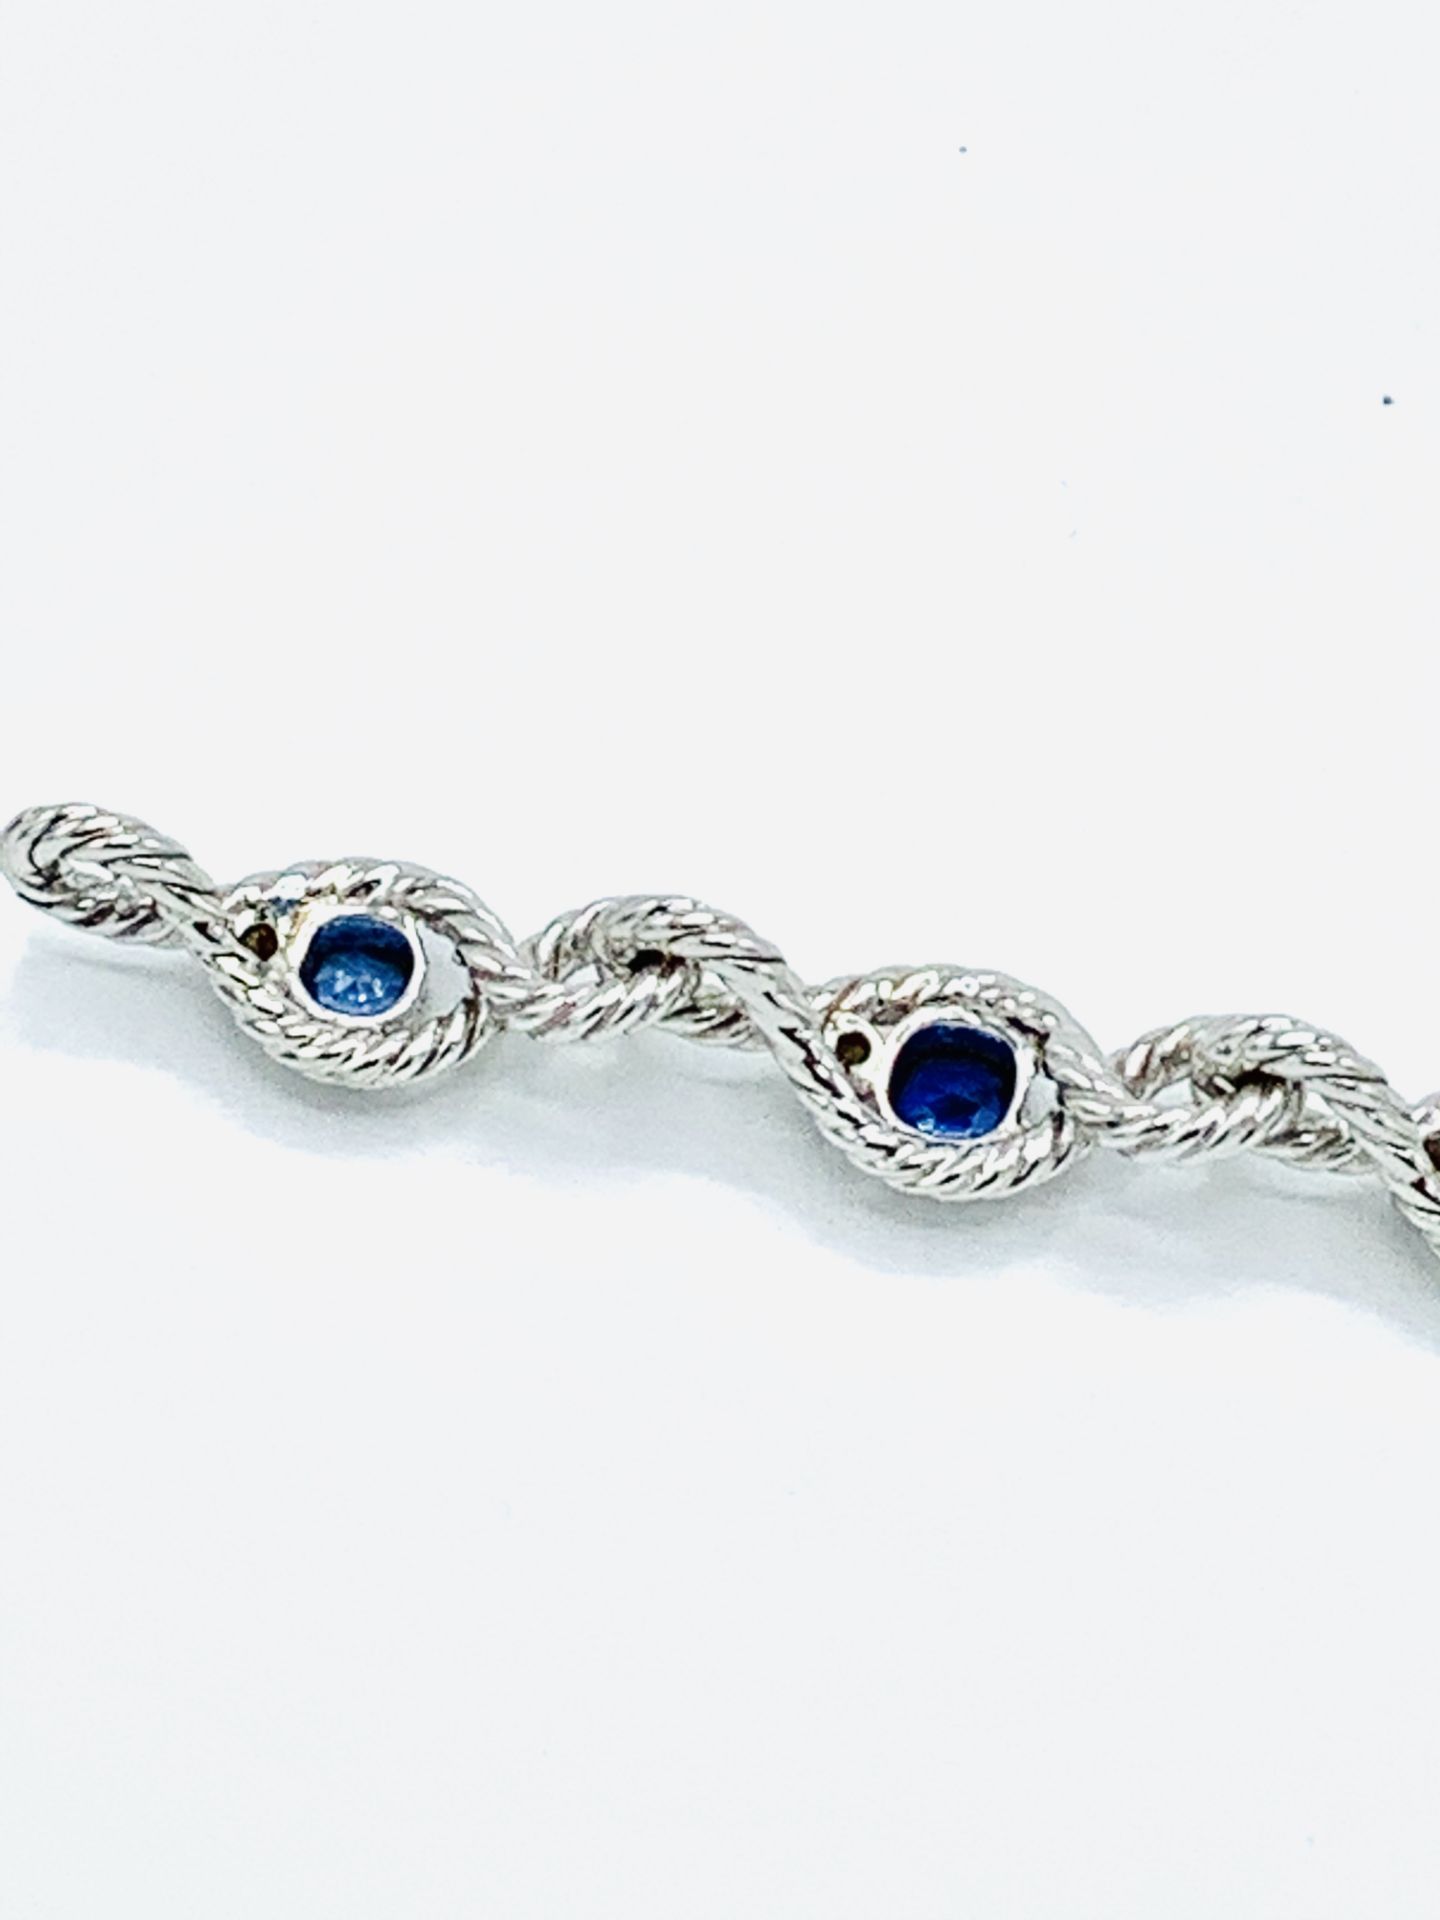 18ct white gold and graduated sapphire twisted bracelet. - Image 6 of 8